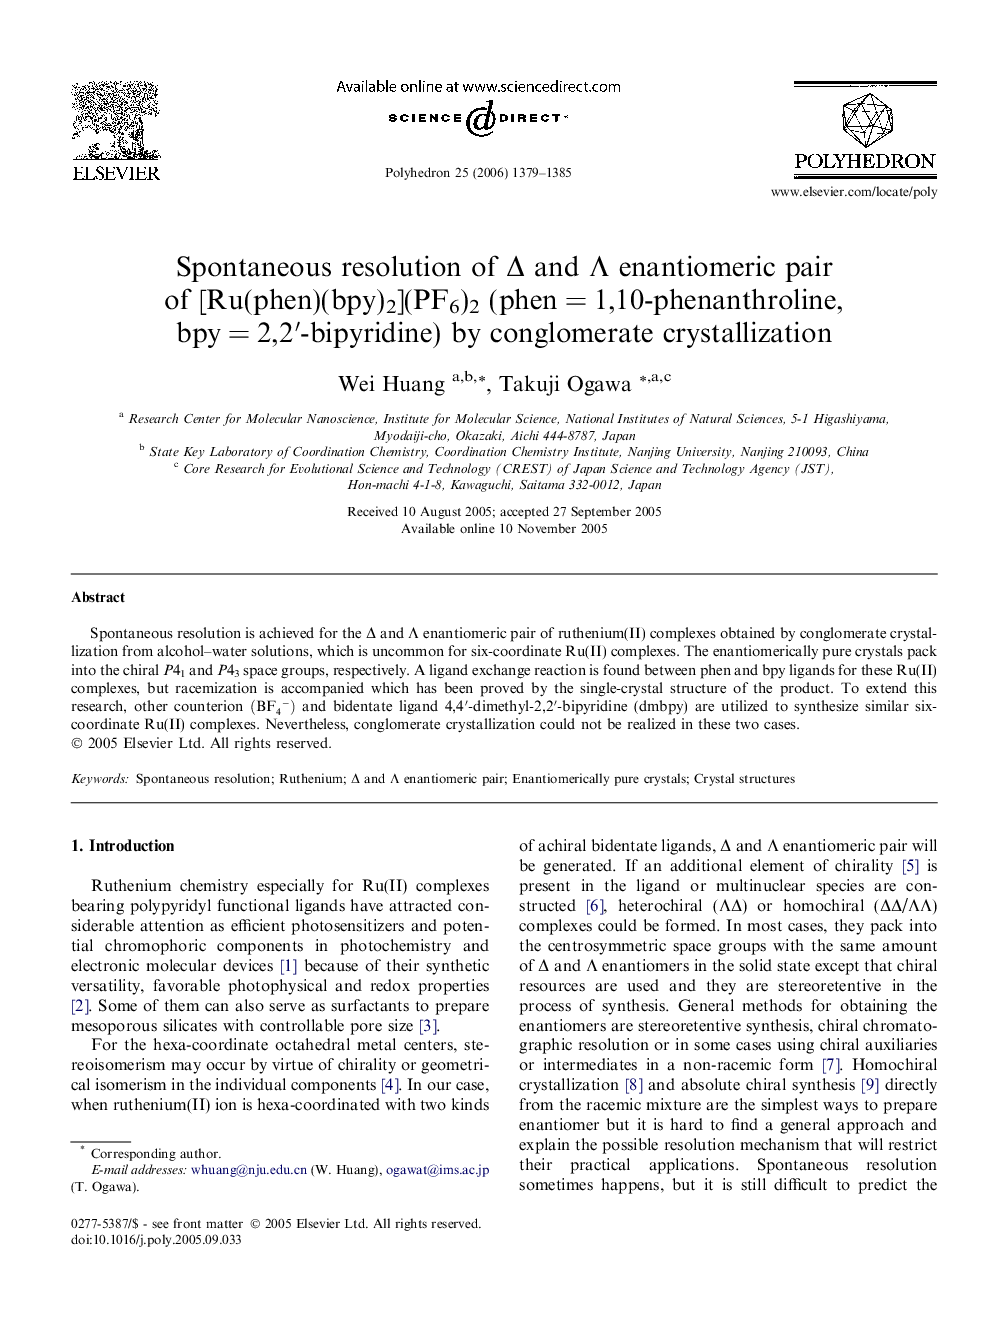 Spontaneous resolution of Δ and Λ enantiomeric pair of [Ru(phen)(bpy)2](PF6)2 (phen = 1,10-phenanthroline, bpy = 2,2′-bipyridine) by conglomerate crystallization